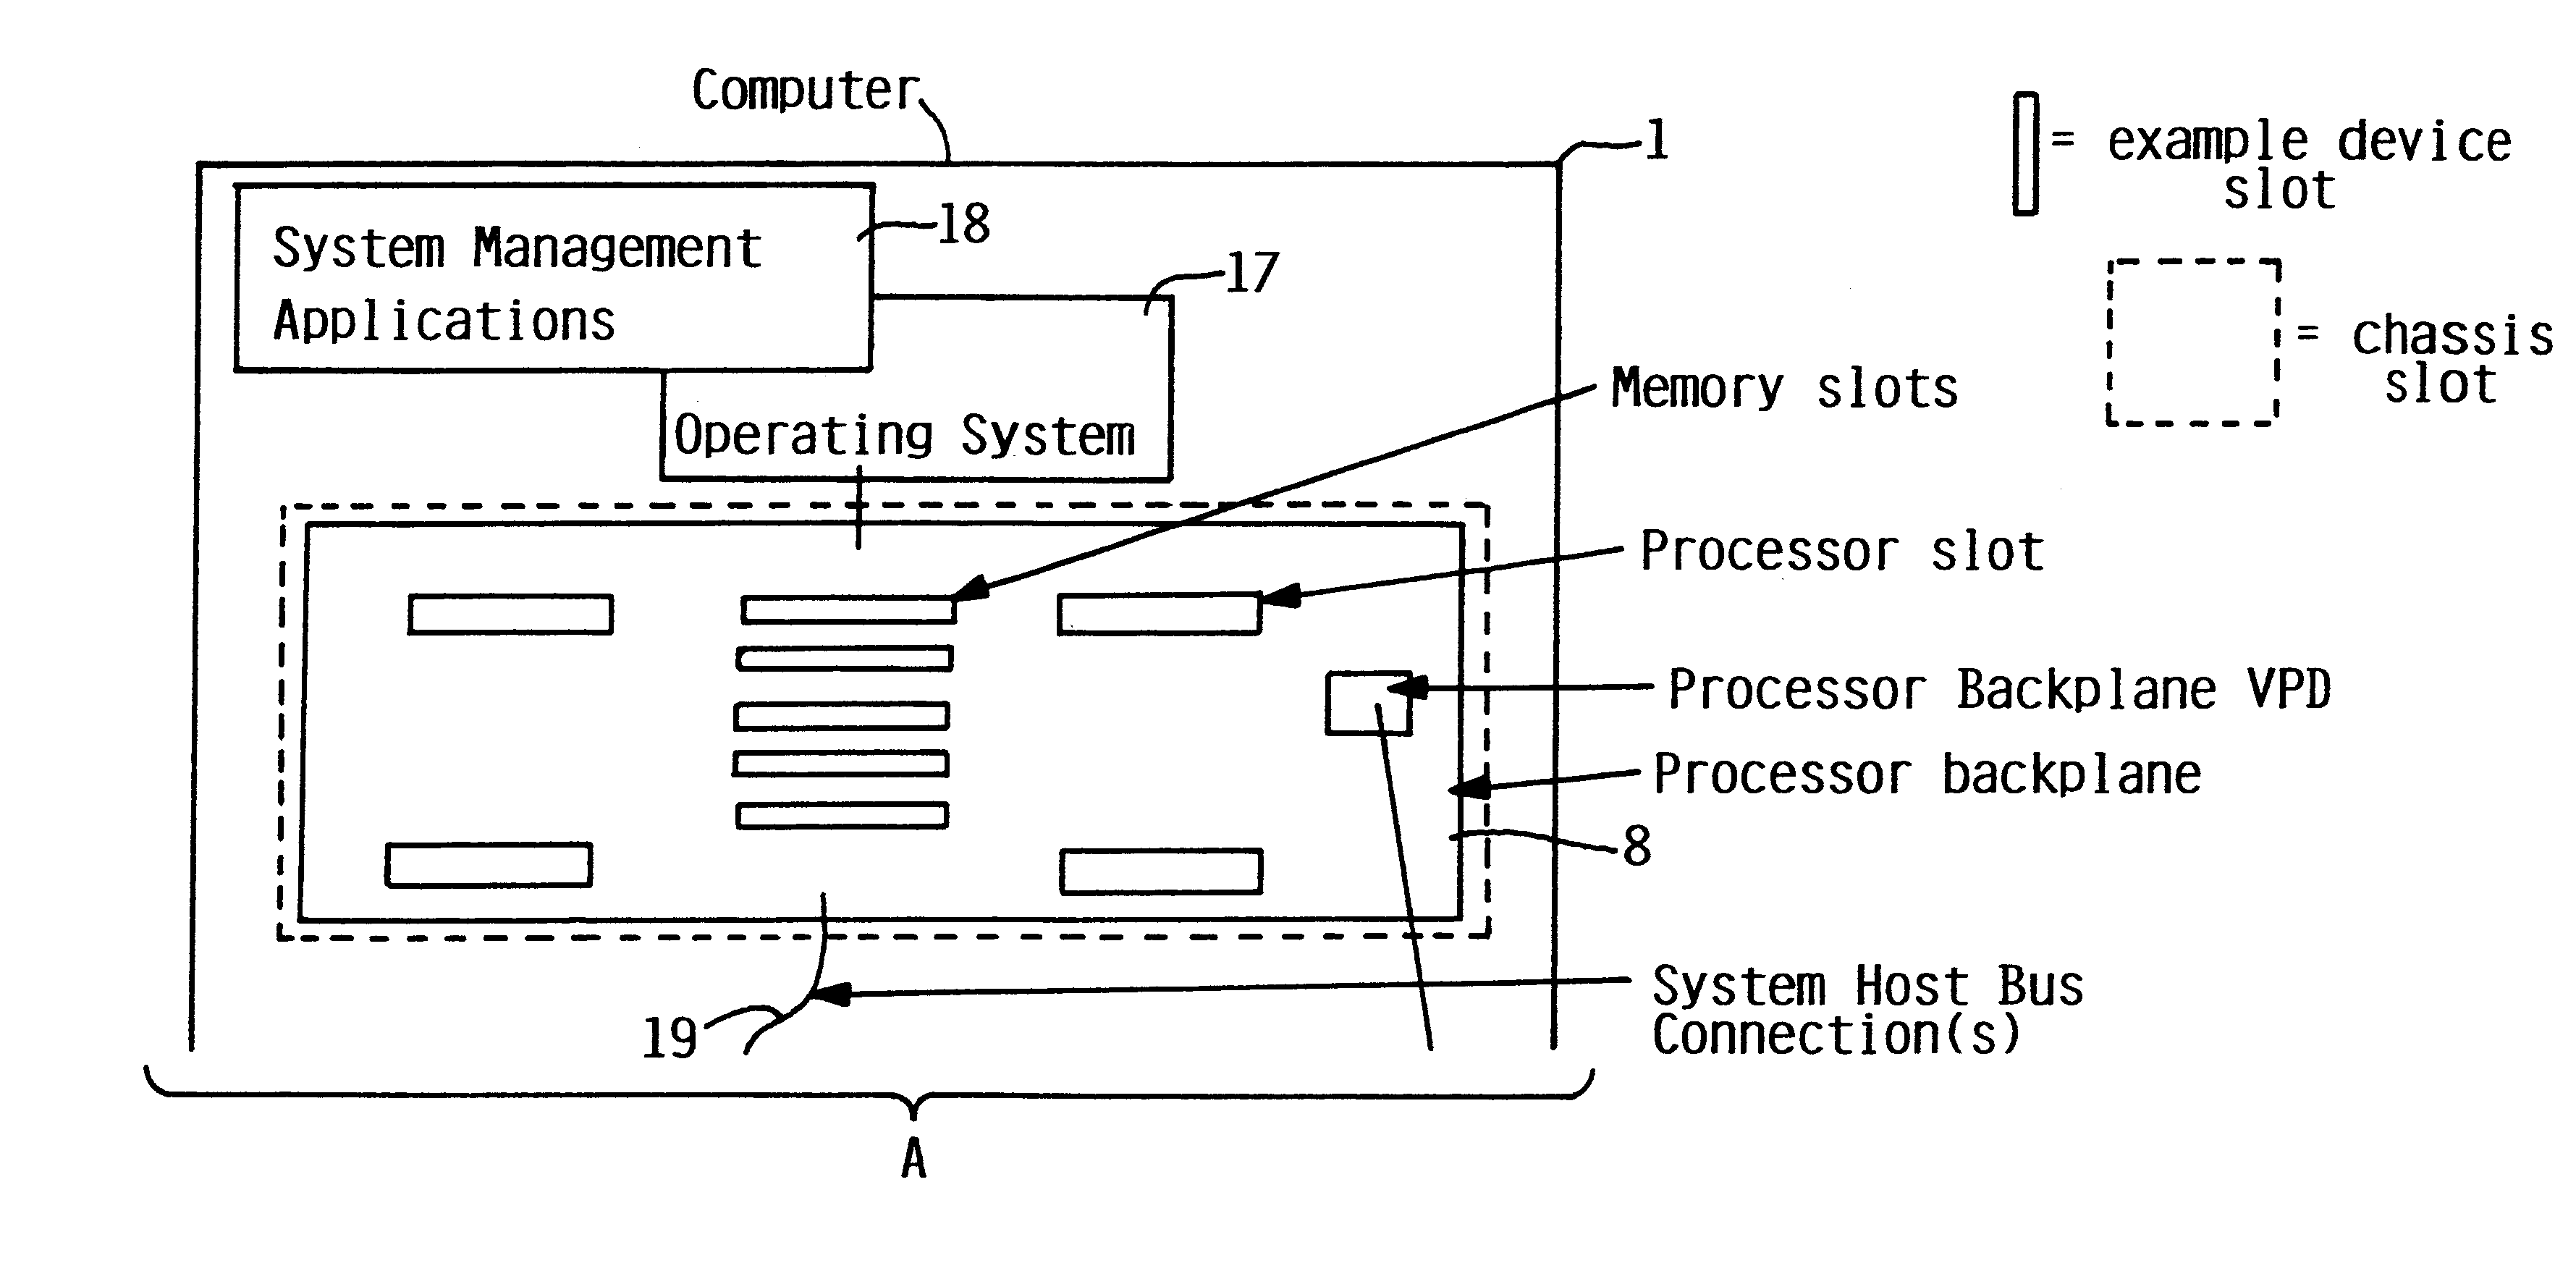 Addition of slot, backplane, chassis and device parametric properties to vital product data (VPD) in a computer system